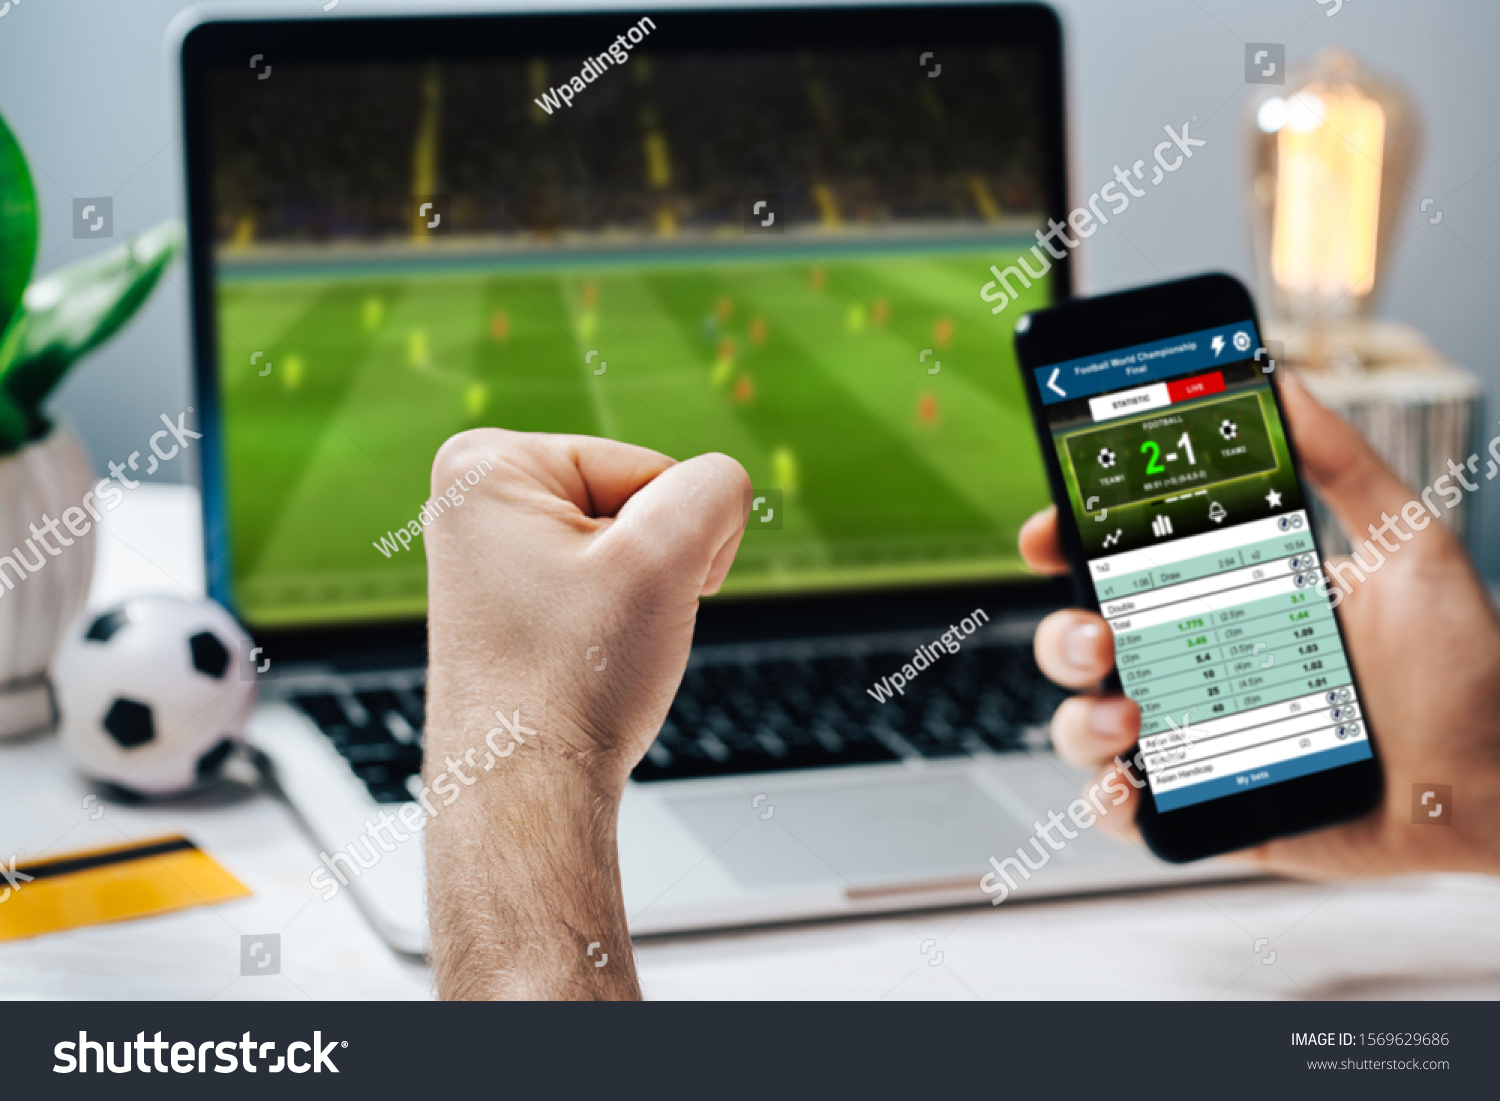 Lucky man celebrating money win. Male fan watching football play online broadcast on his laptop, cheering for his favorite team and making bets at bookmaker's website. #1569629686